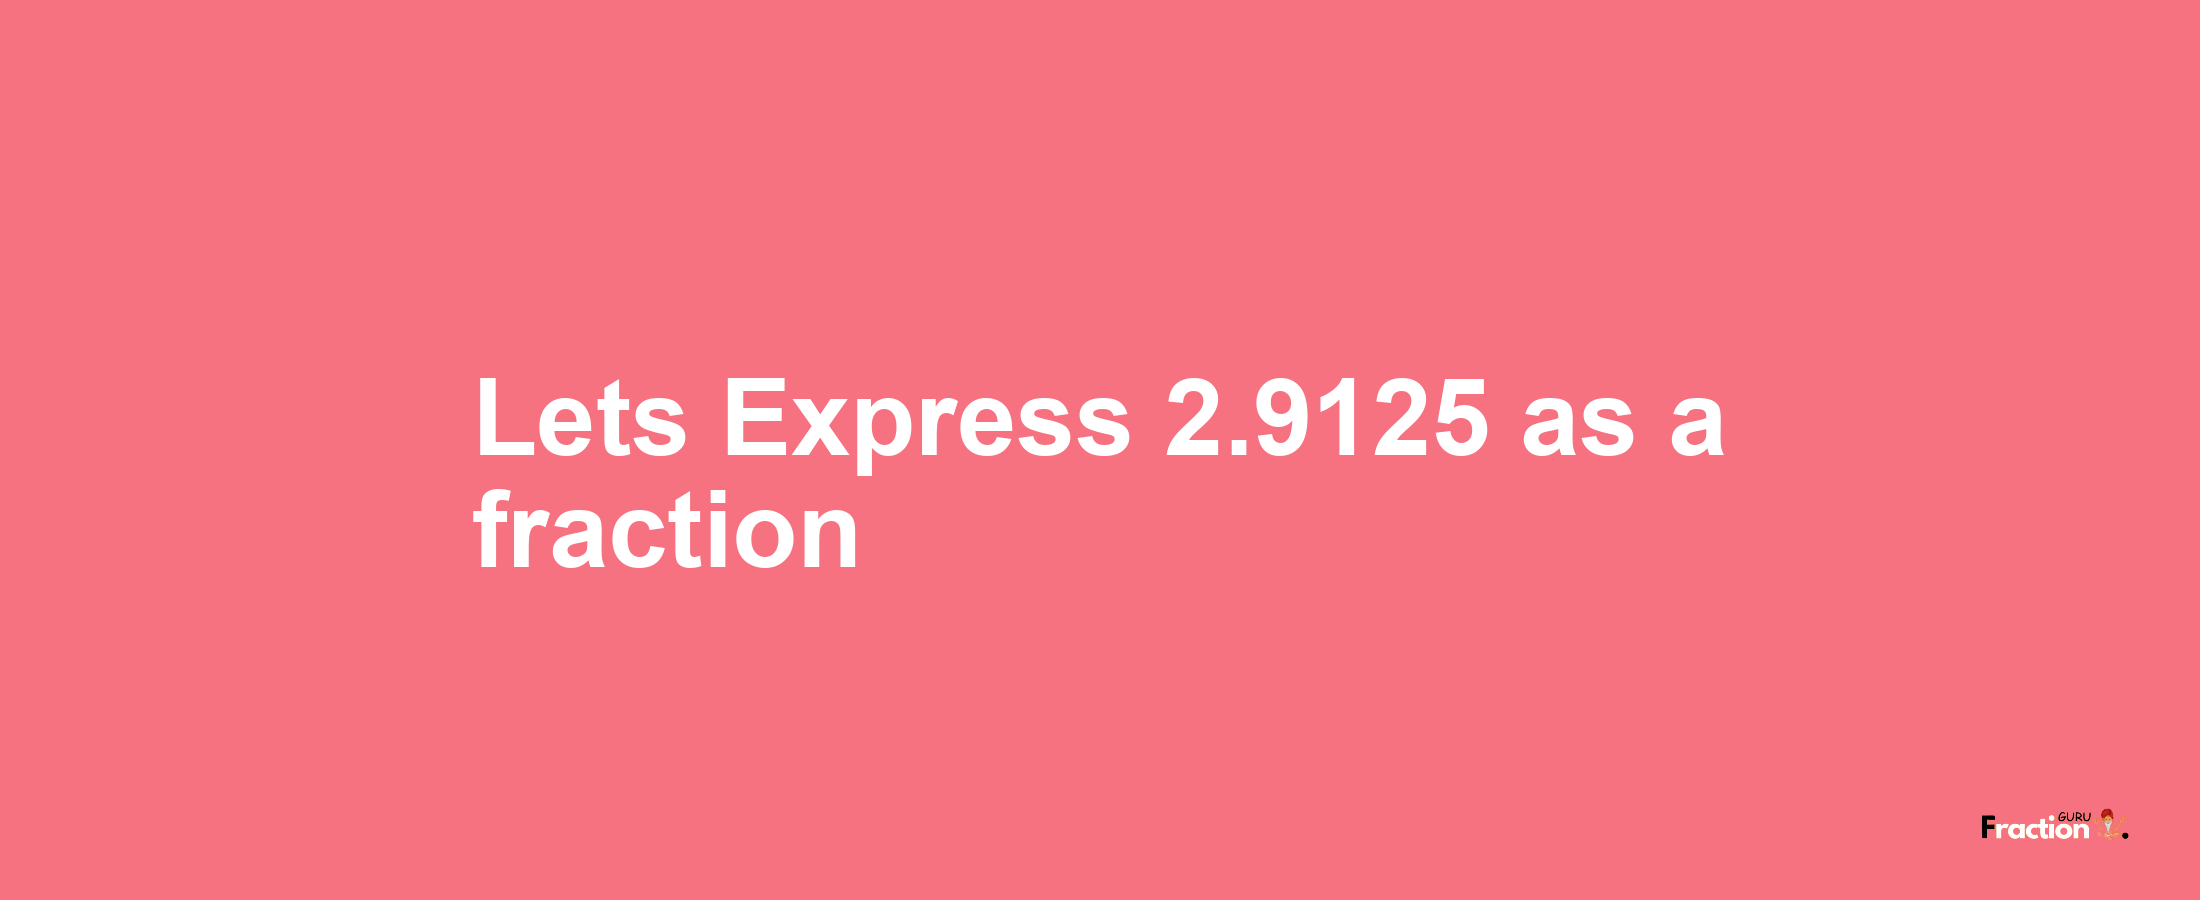 Lets Express 2.9125 as afraction